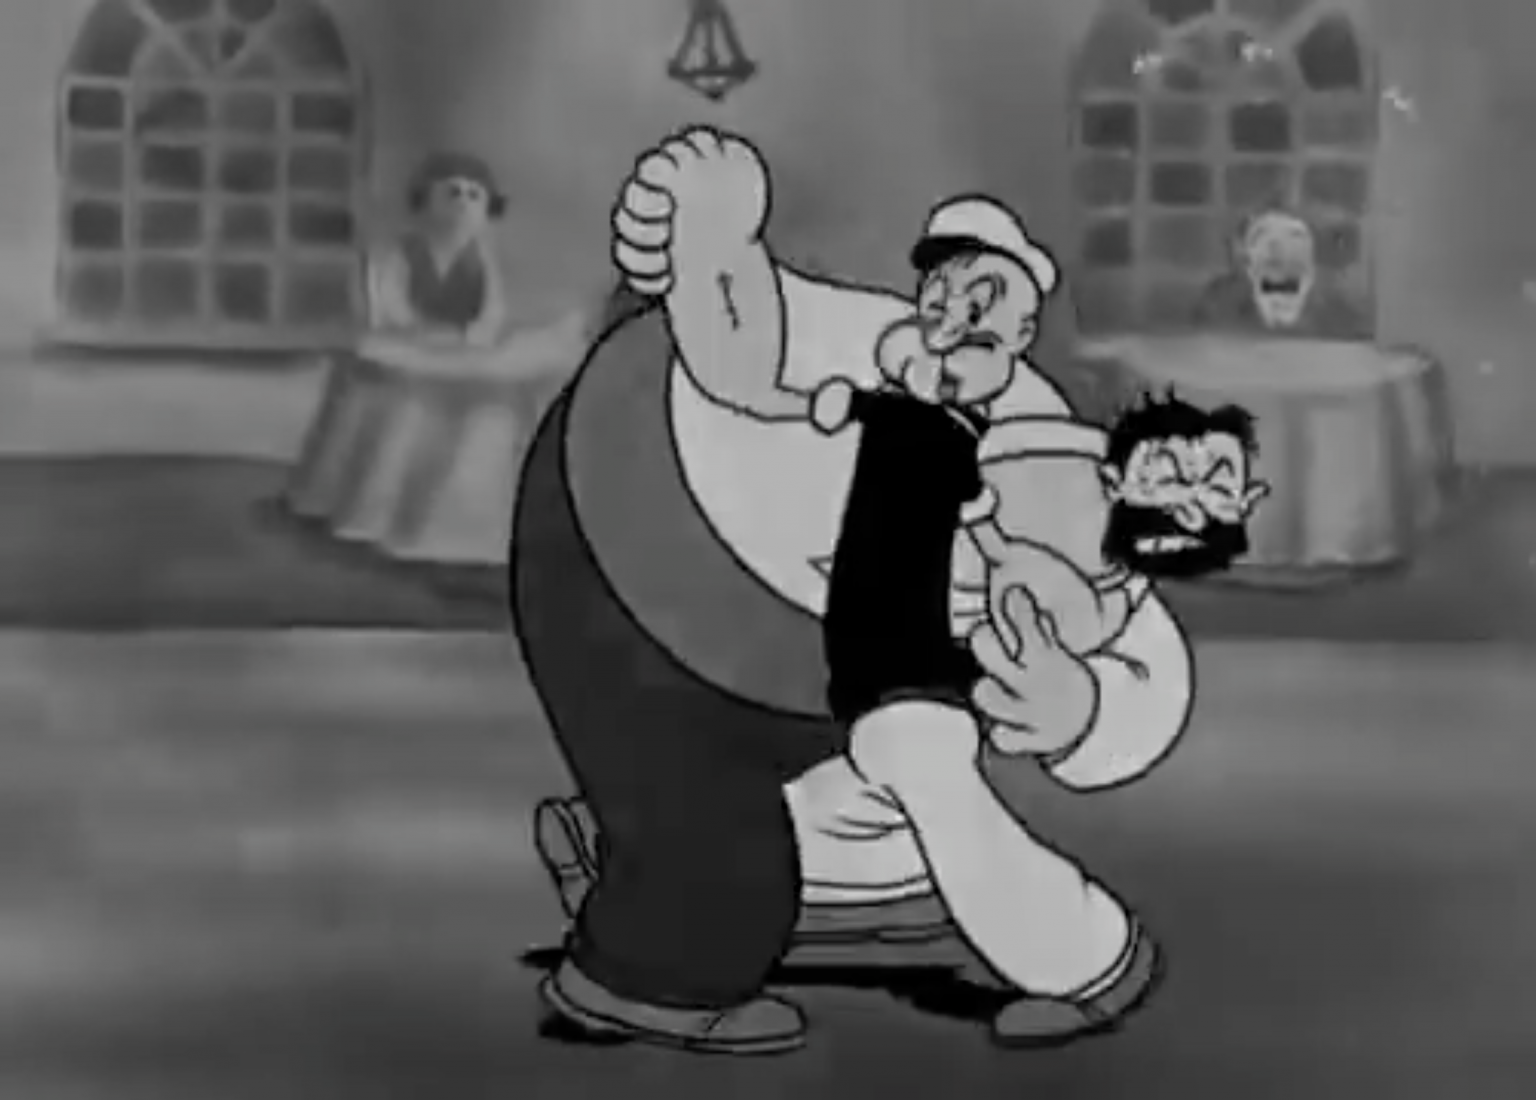 Popeye Almost Tangos With Bluto 1934 Still Taken From Cartoon The Queer Tango Image Archive 8222